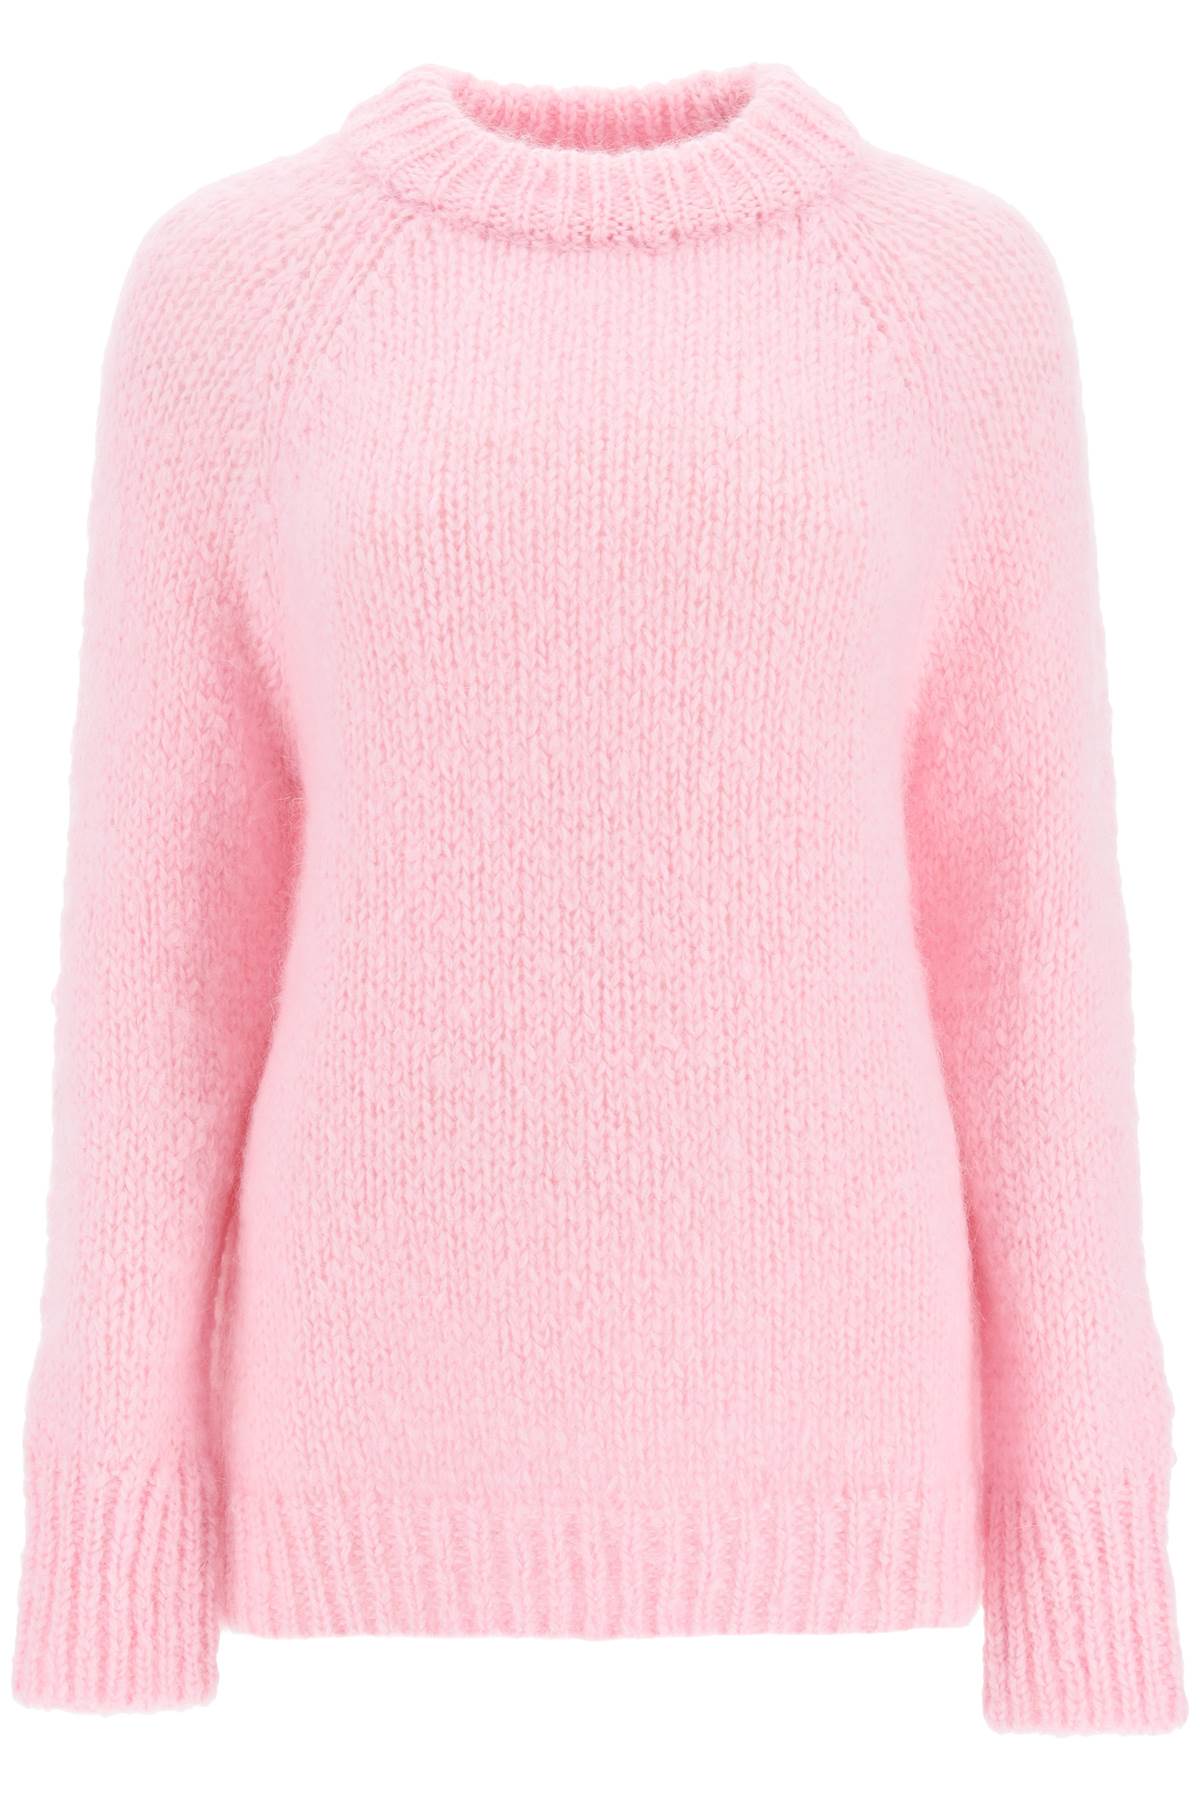 CECILIE BAHNSEN INDIRA WOOL AND MOHAIR SWEATER